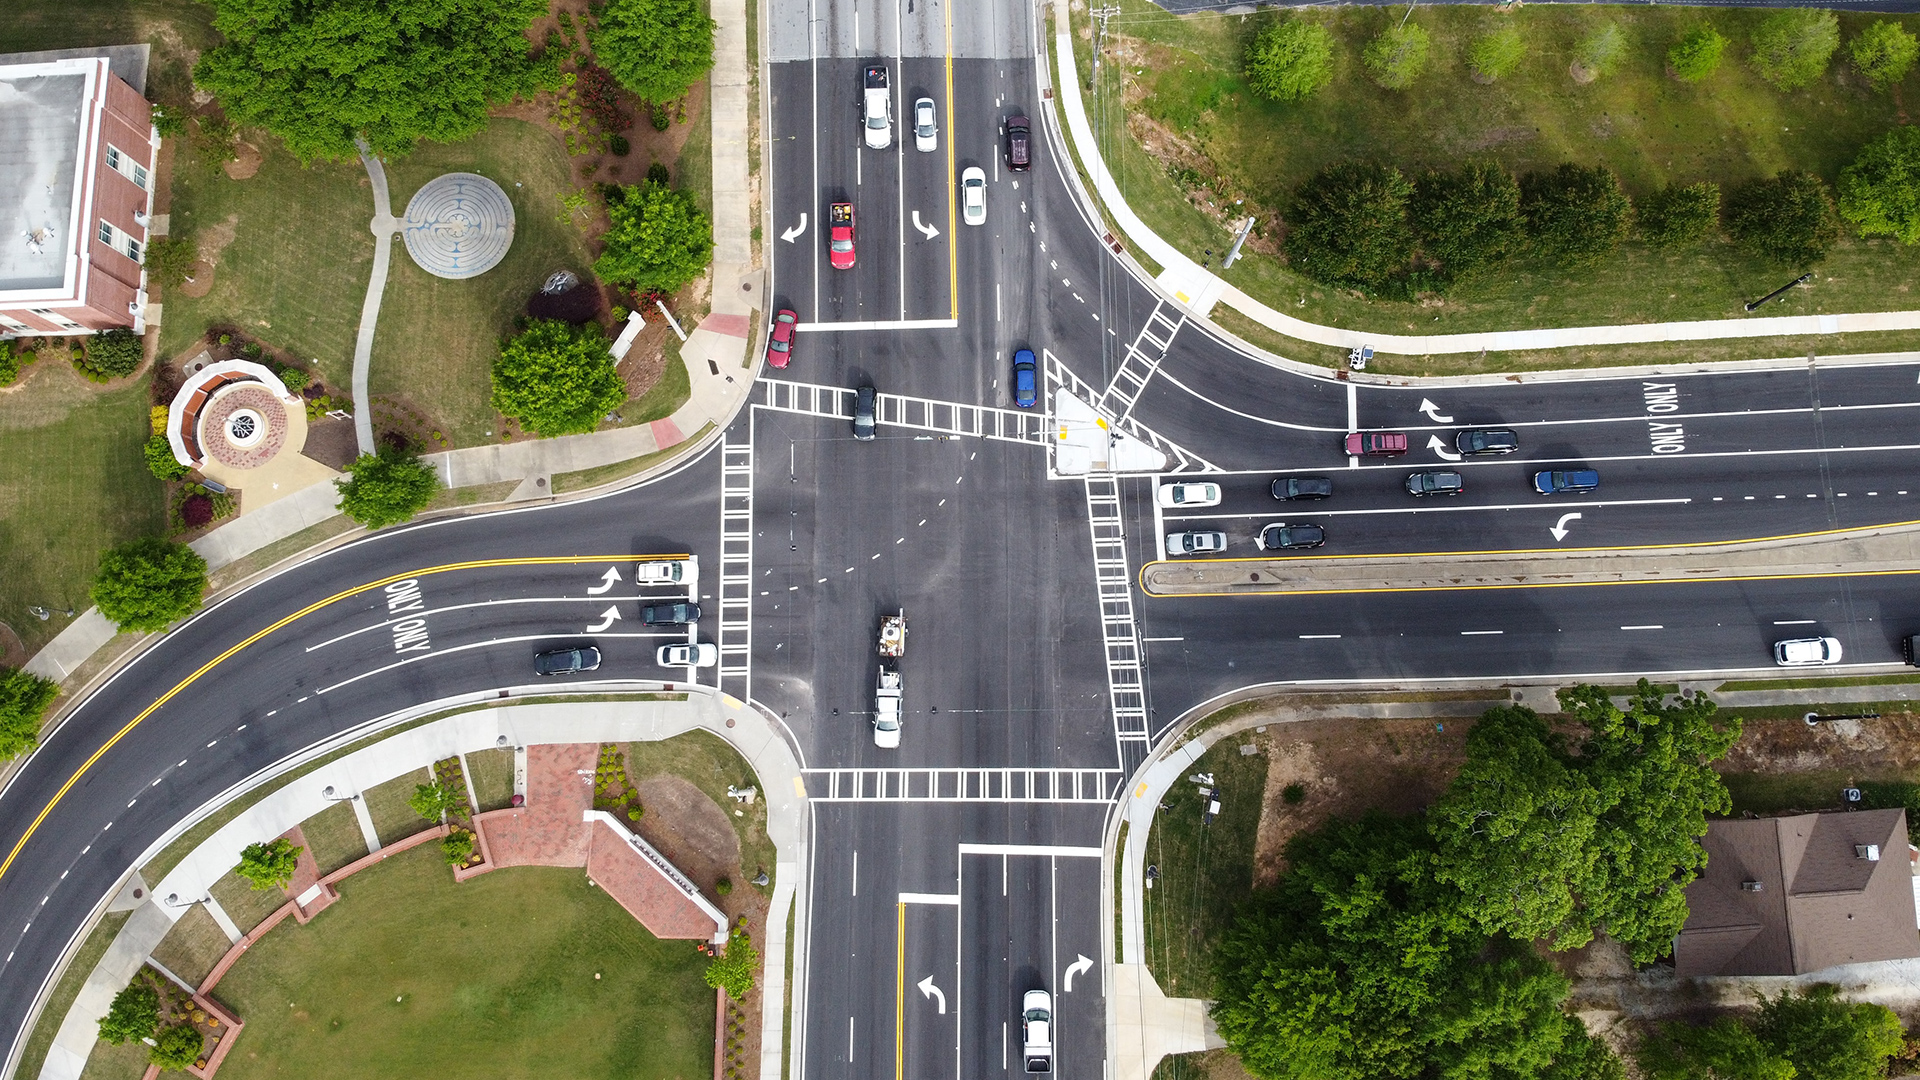 Aerial View of Intersection